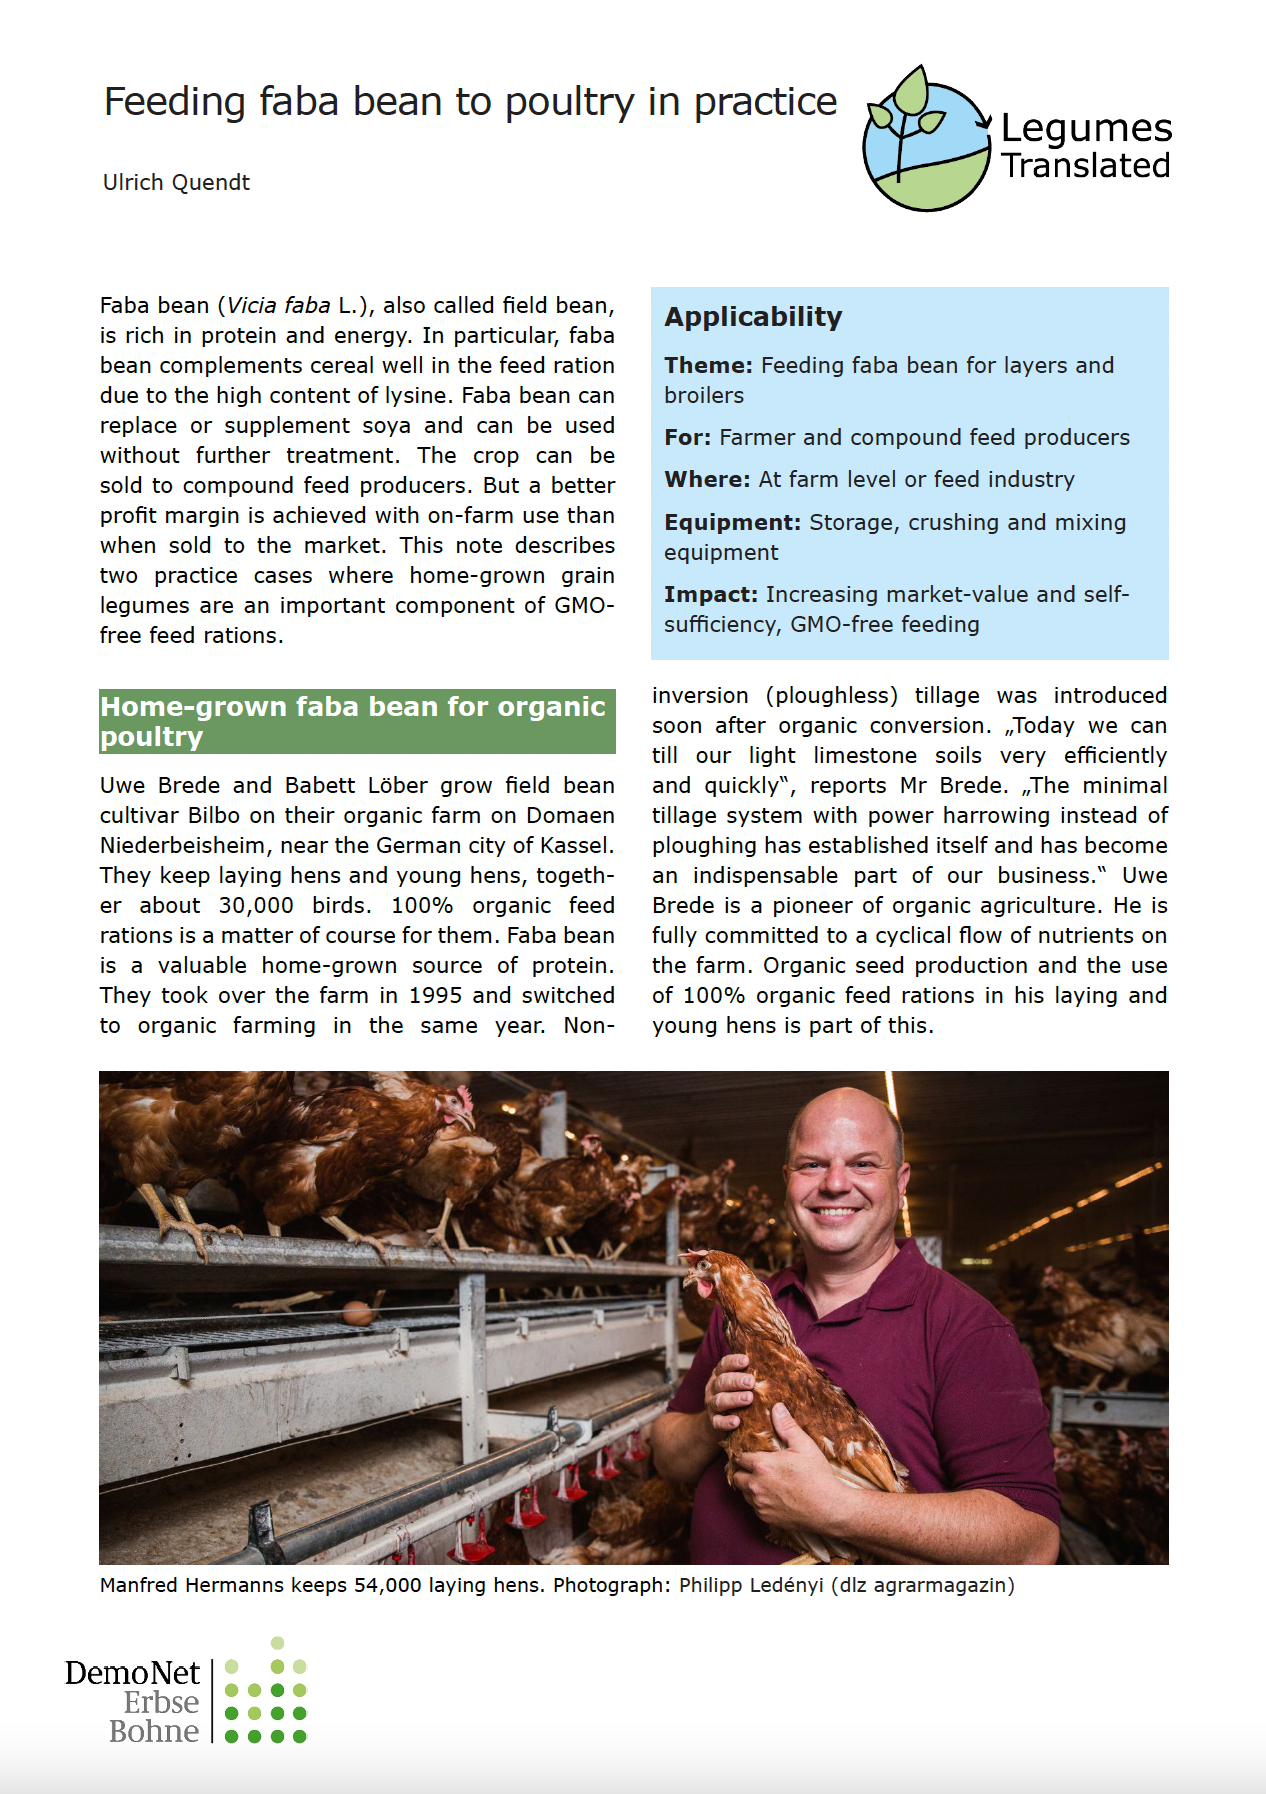 Feeding faba bean to poultry in practice